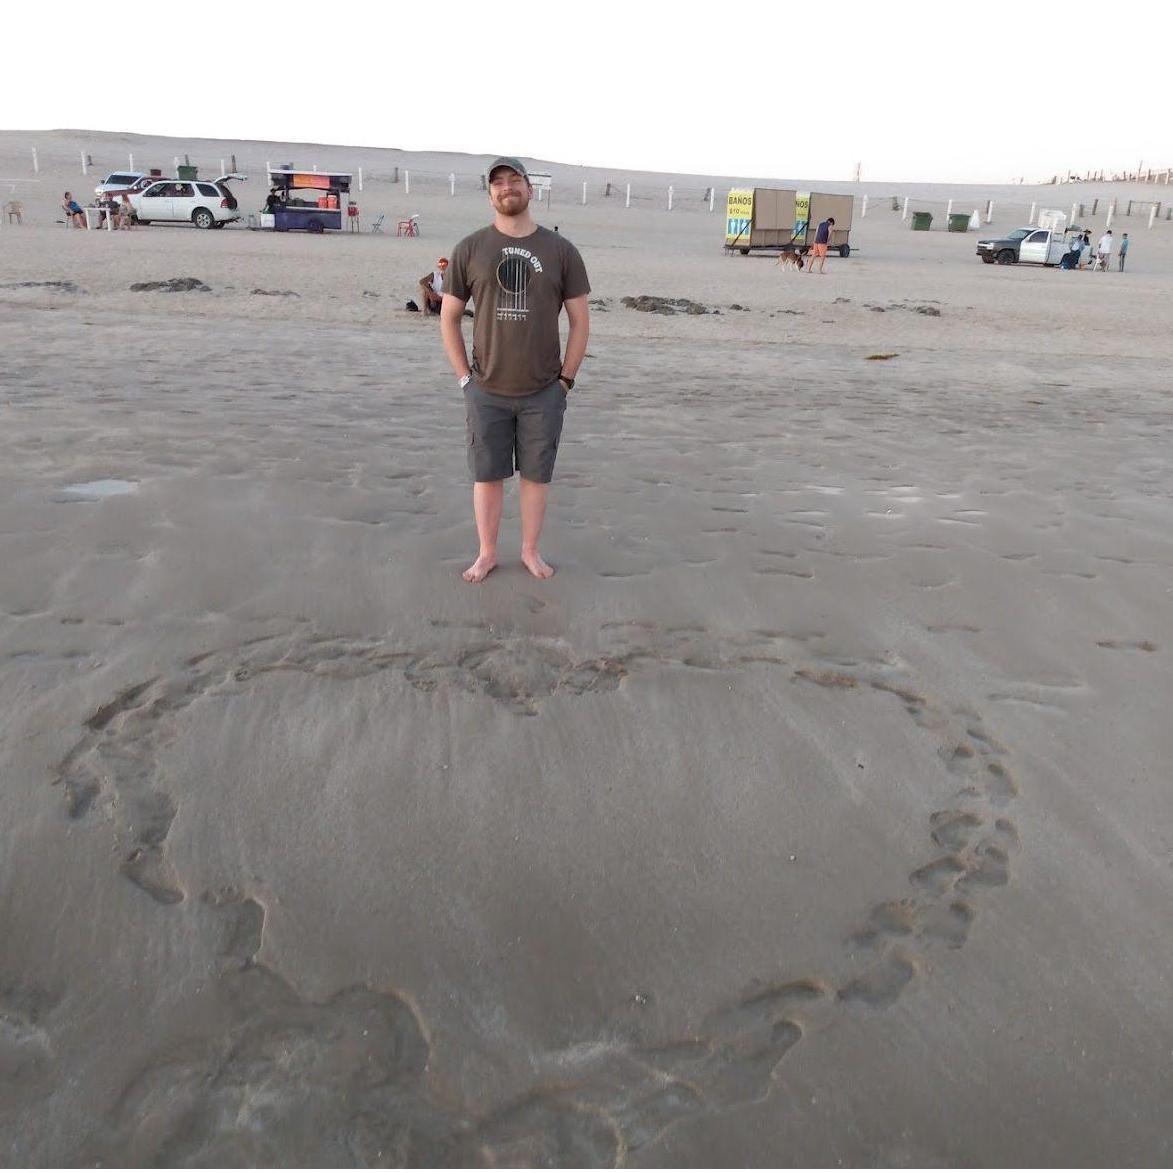 Walk on the beach and making a heart in the sand